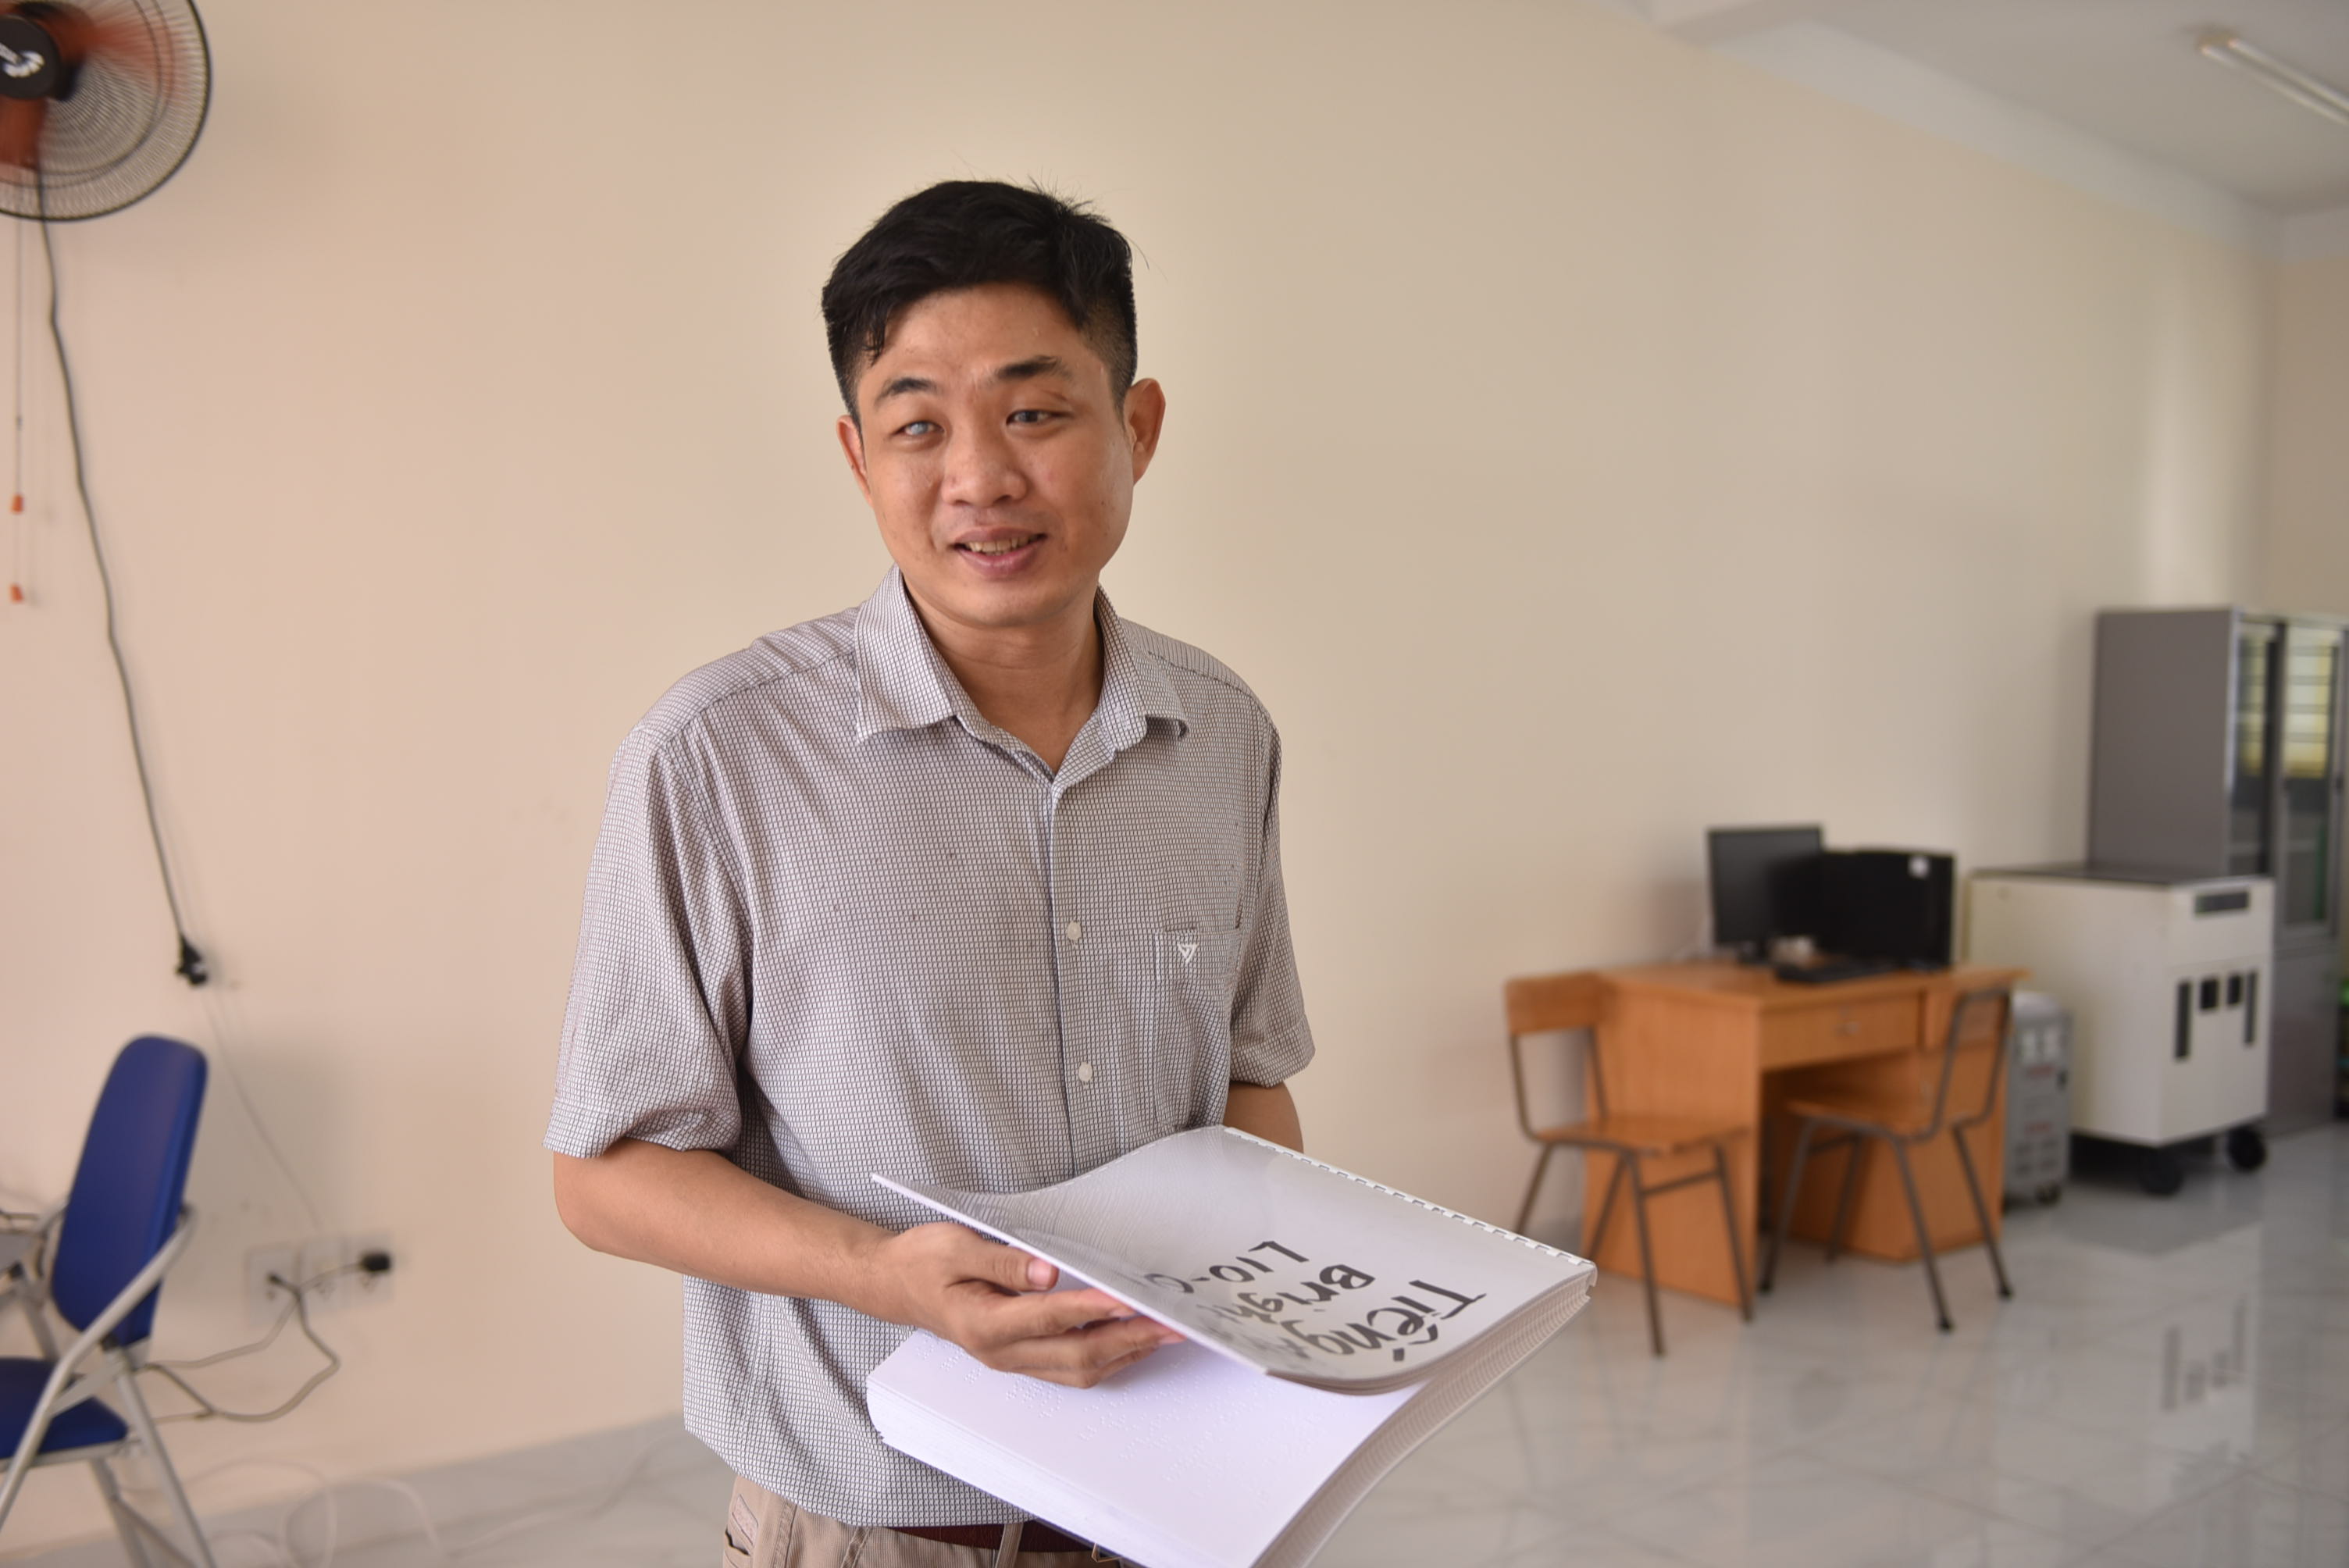 Teacher Le Hong Vu Minh has been blind since he was ten years old, but he has tried to overcome his fate to become an excellent English teacher at Nguyen Dinh Chieu Special School. Photo: Ngoc Phuong / Tuoi Tre